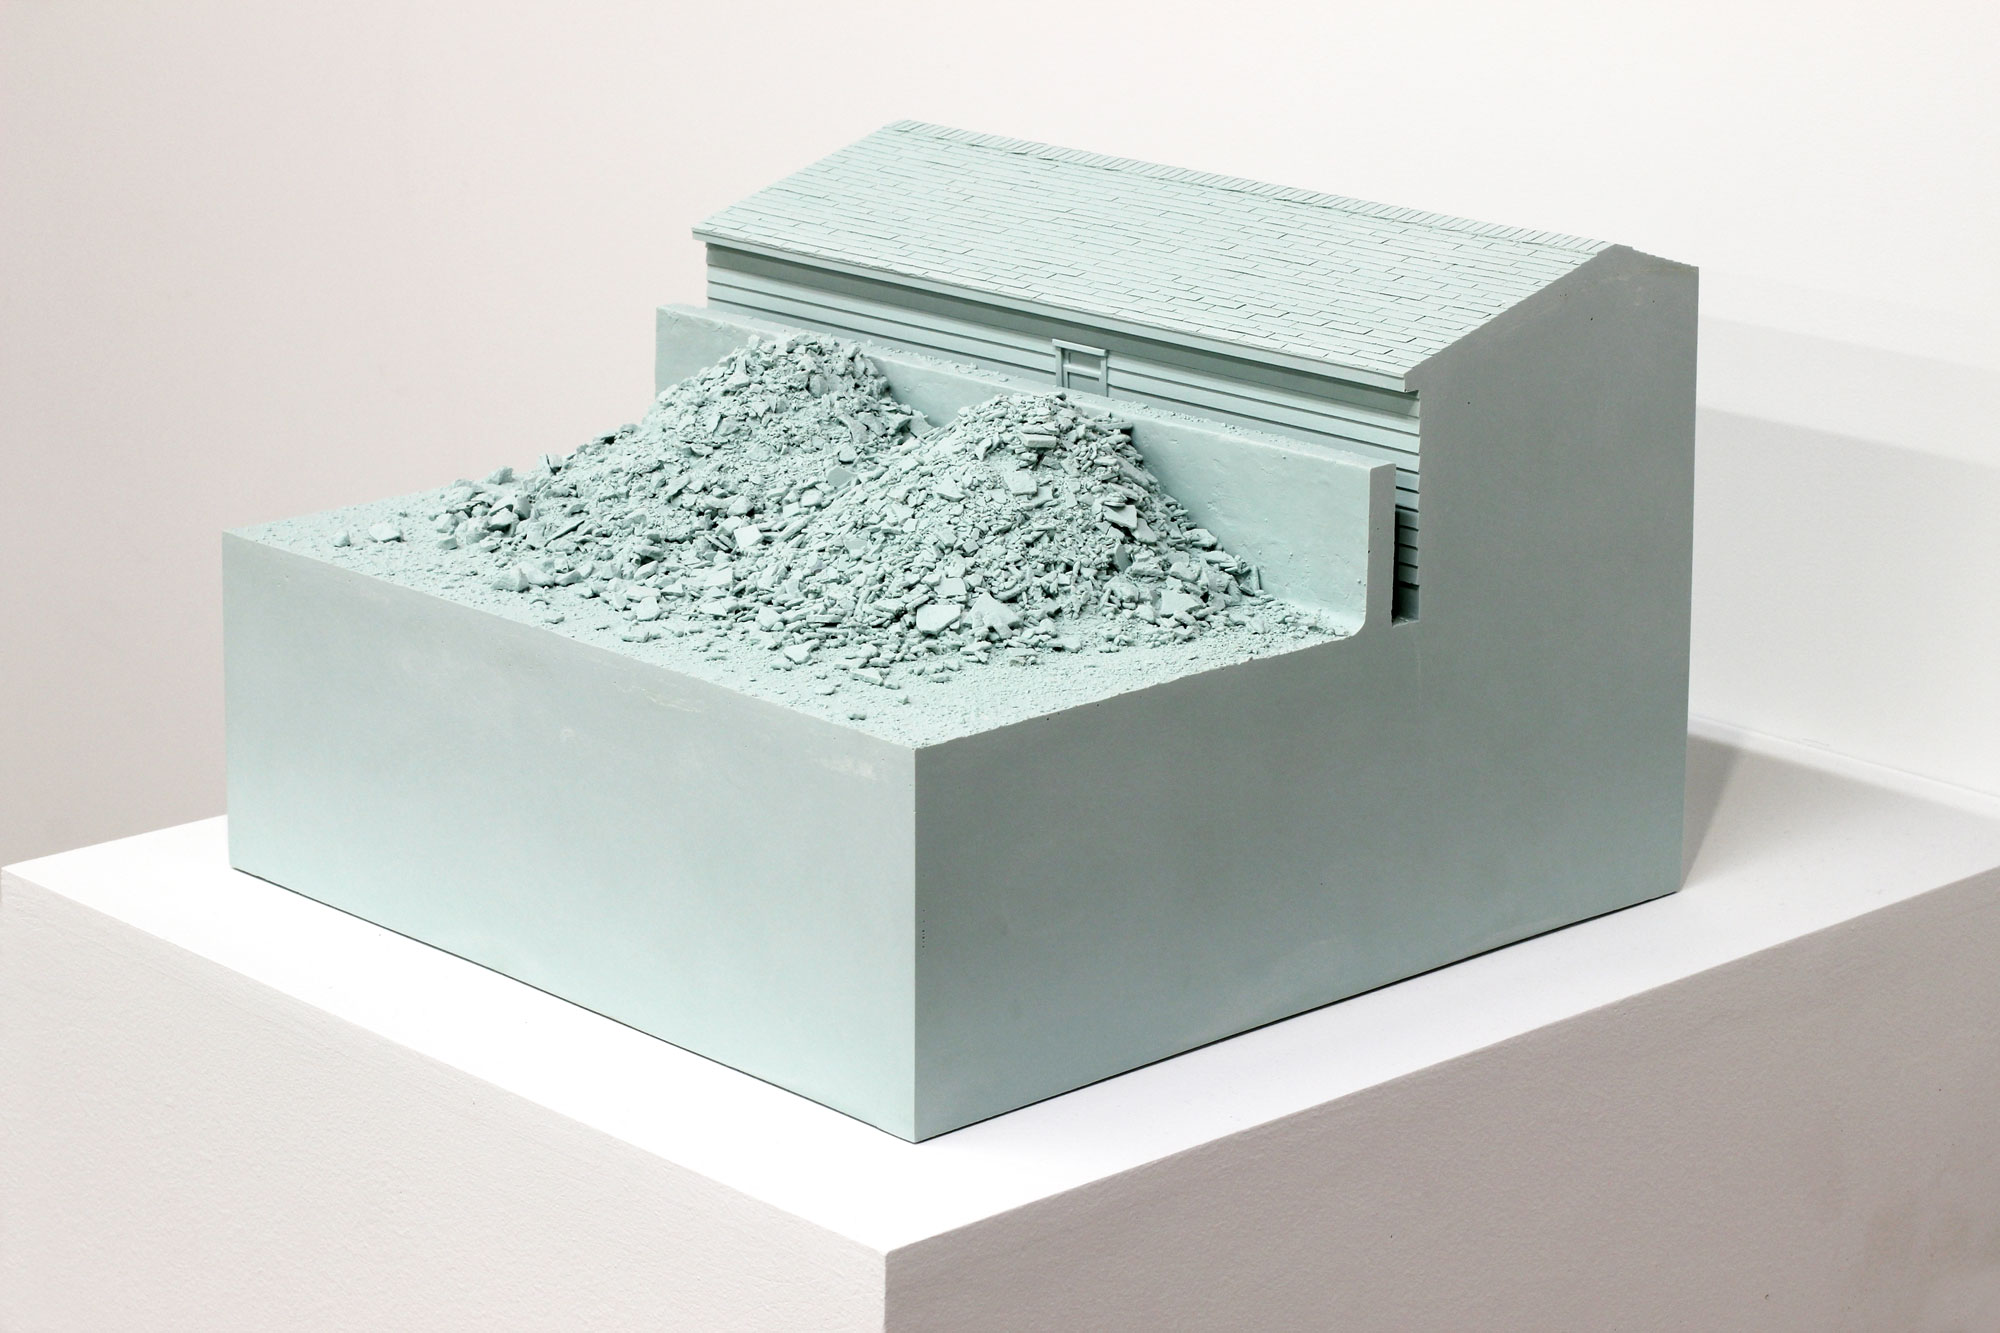 Nathaniel Robinson, Repose, 2015, pigmented polyurethane resin, 10.5h x 14w x 14d in.